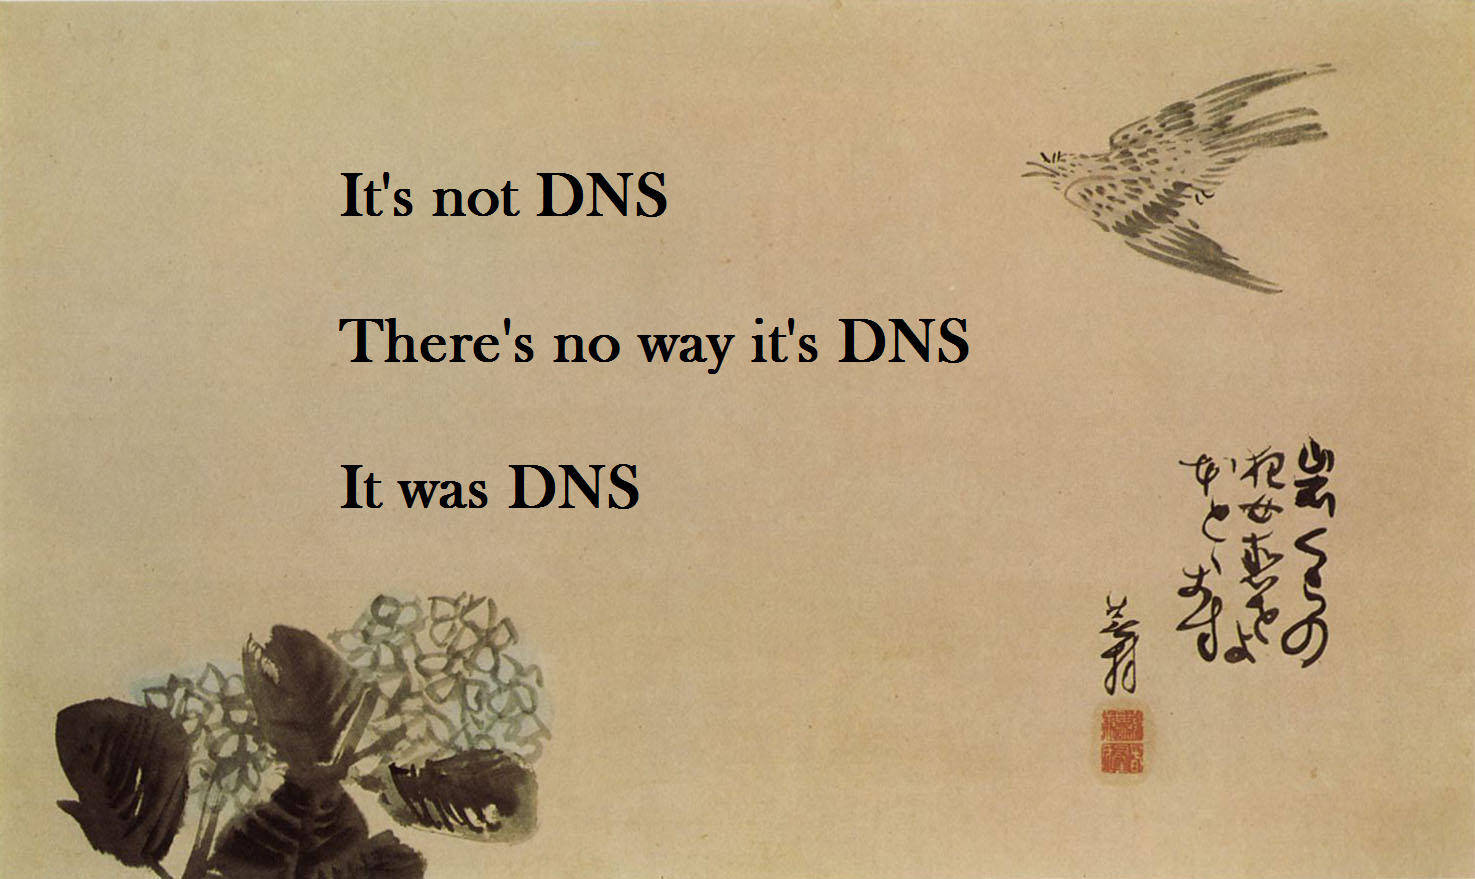 It’s not DNS. It can’t be DNS. It was DNS.